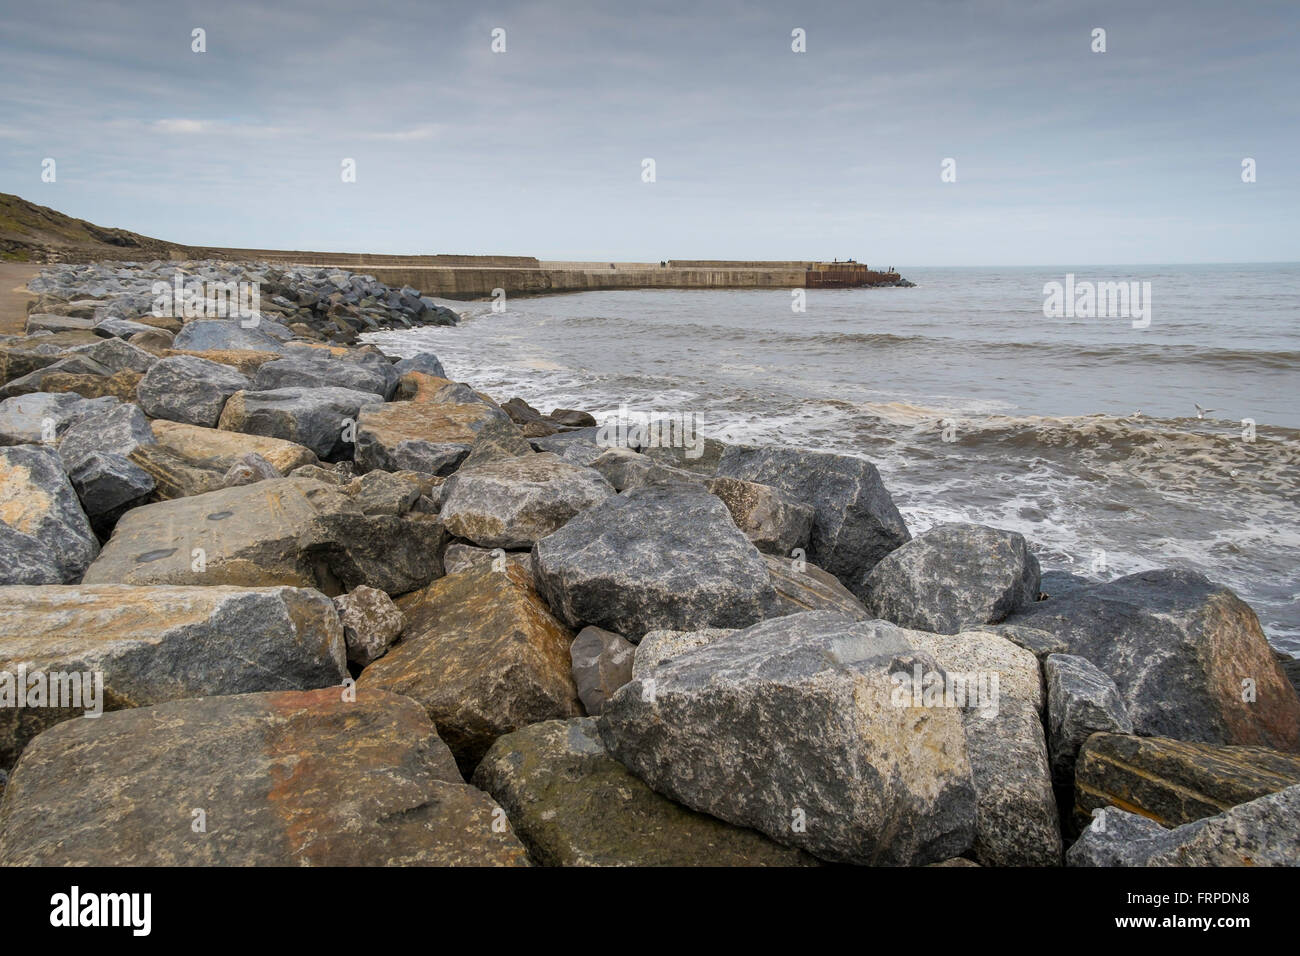 Rock armour to prevent coastal erosion in Skinningrove Harbour Cleveland UK Stock Photo